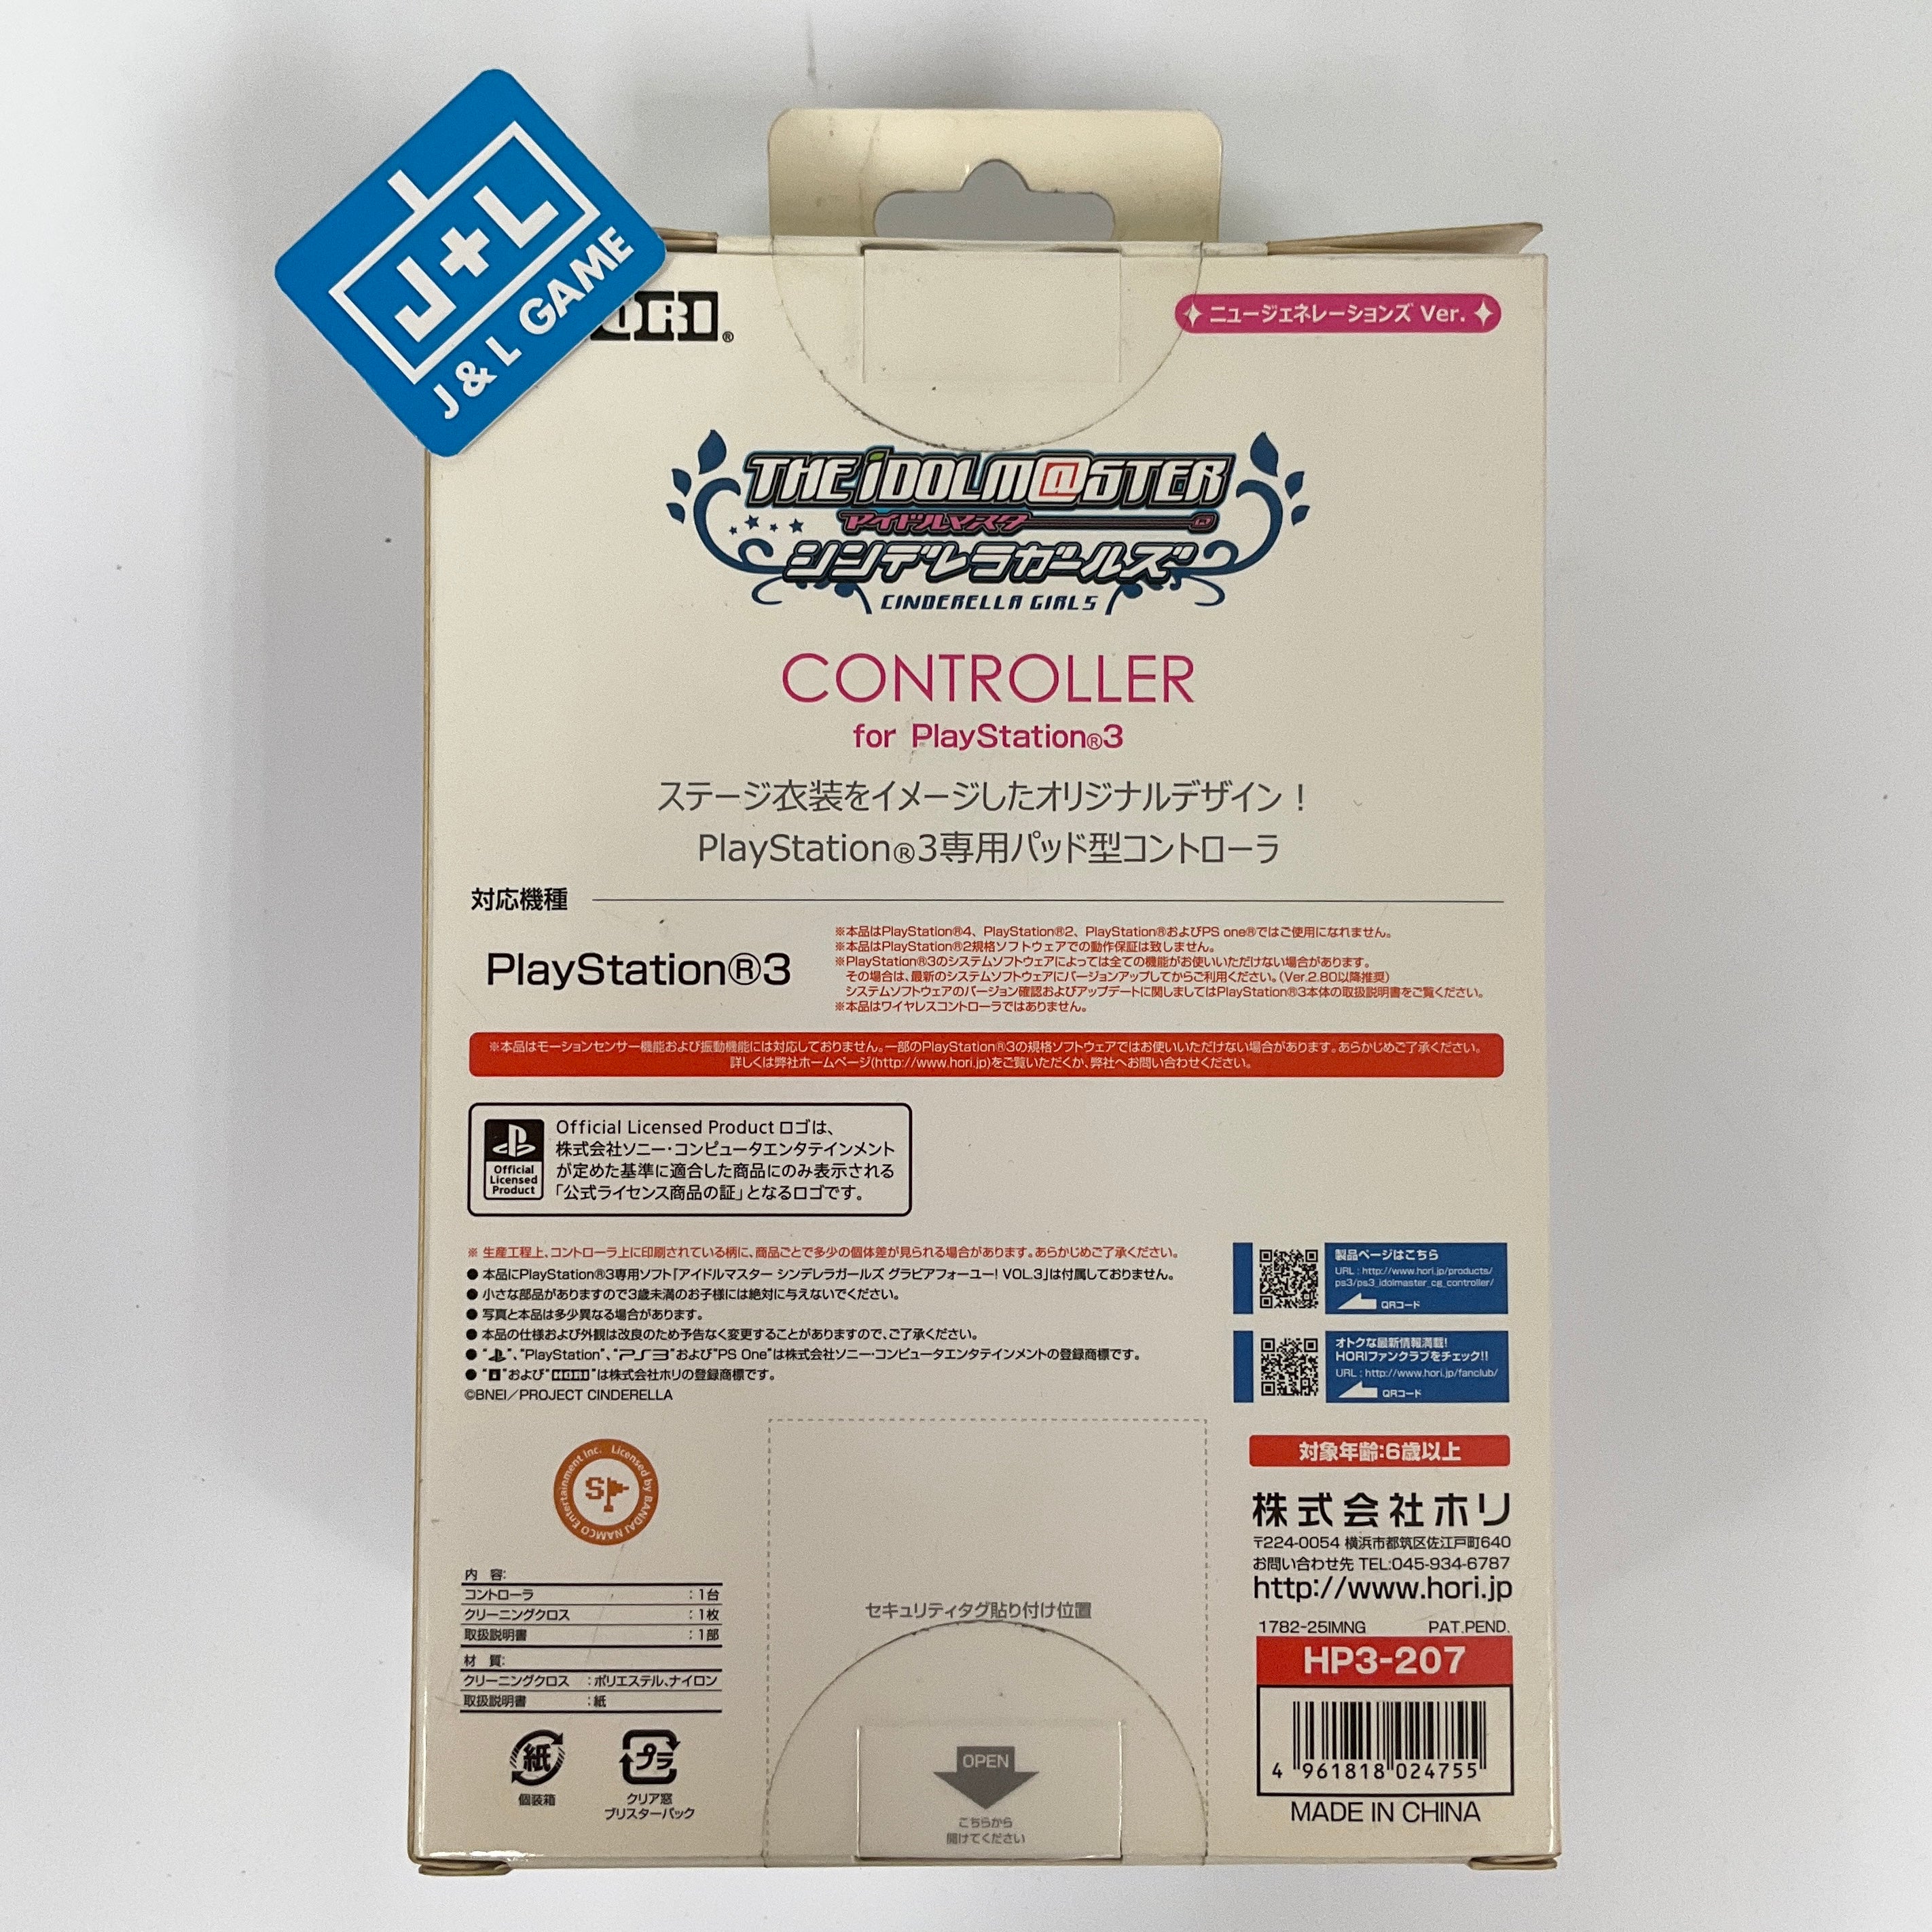 PlayStation 3 The Idol Master Cinderella Girls Controller (New Generations Ver) - (PS3) PlayStation 3 ( Japanese Import ) Accessories HORI   